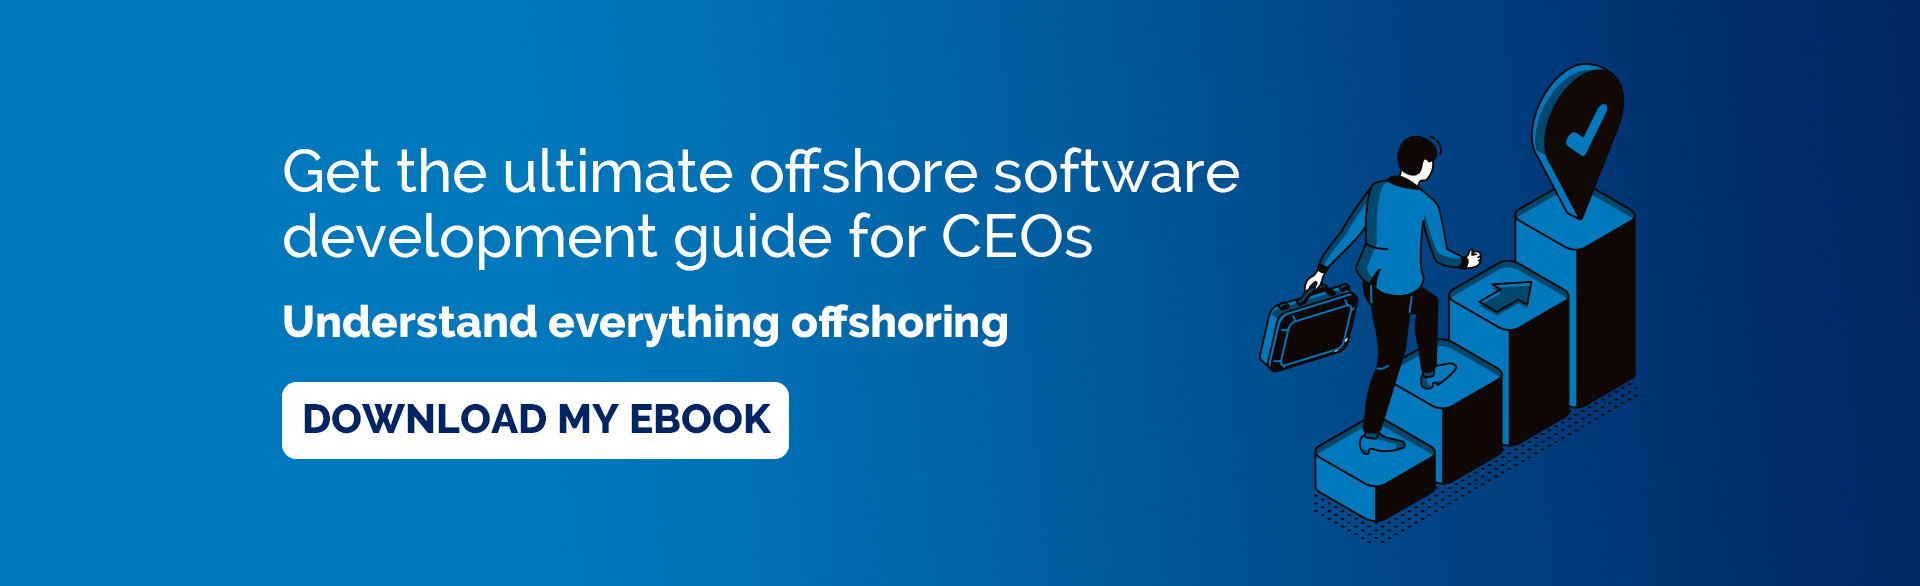 Get the ultimate offshore software development guide for CEOs. Download my ebook.